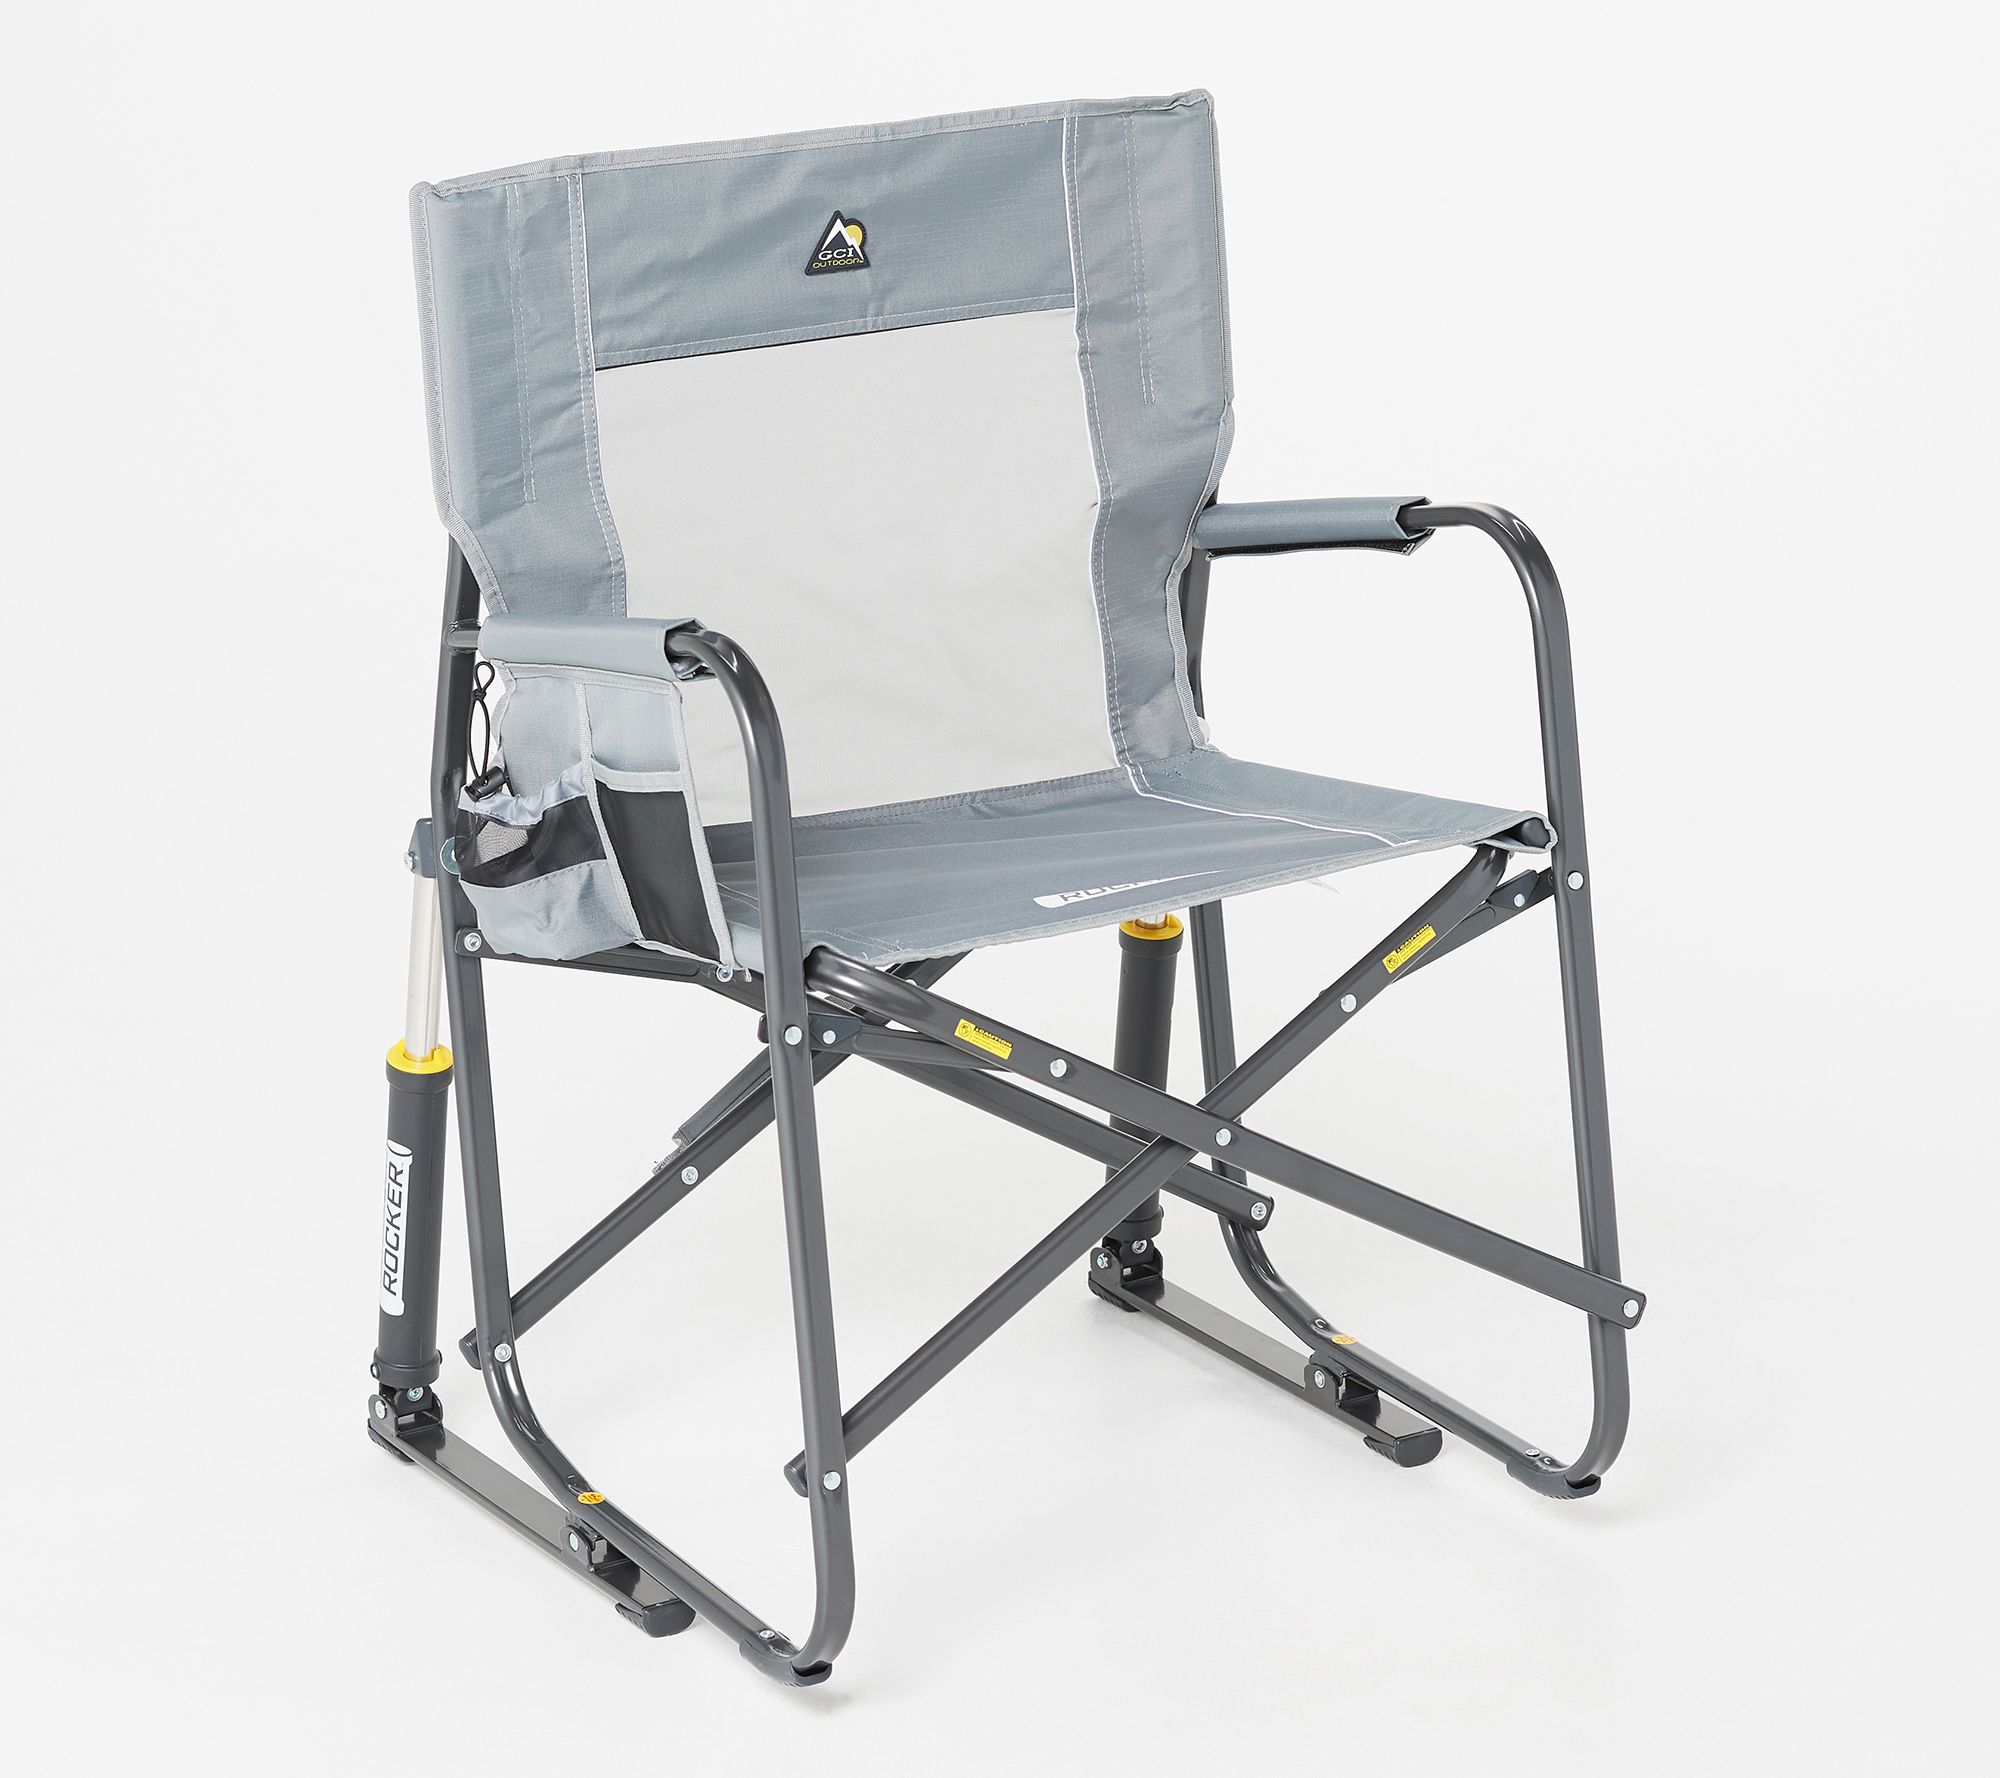 gci outdoor freestyle pro rocker chair with builtin carry handle  qvc